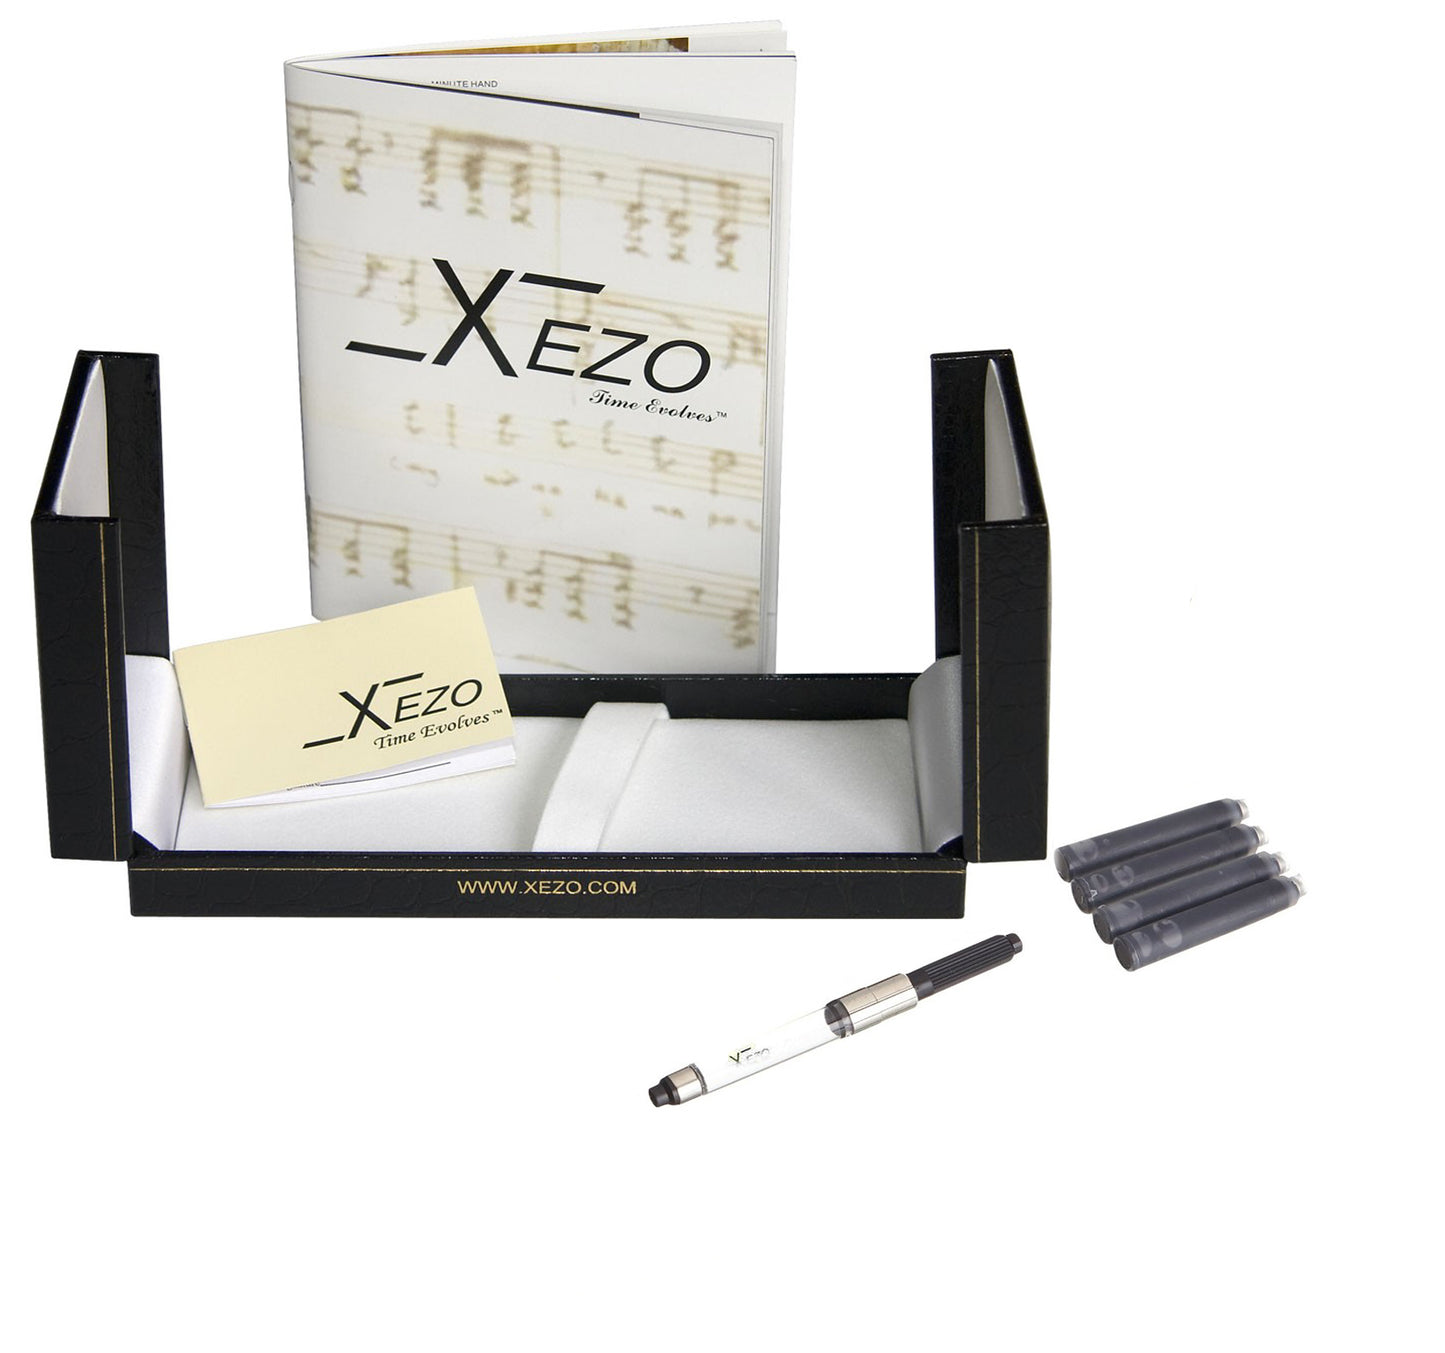 Xezo - Black gift box, certificate, manual, chrome-plated ink converter, and four ink cartridges of the Maestro 925 Sea Shell F fountain pen